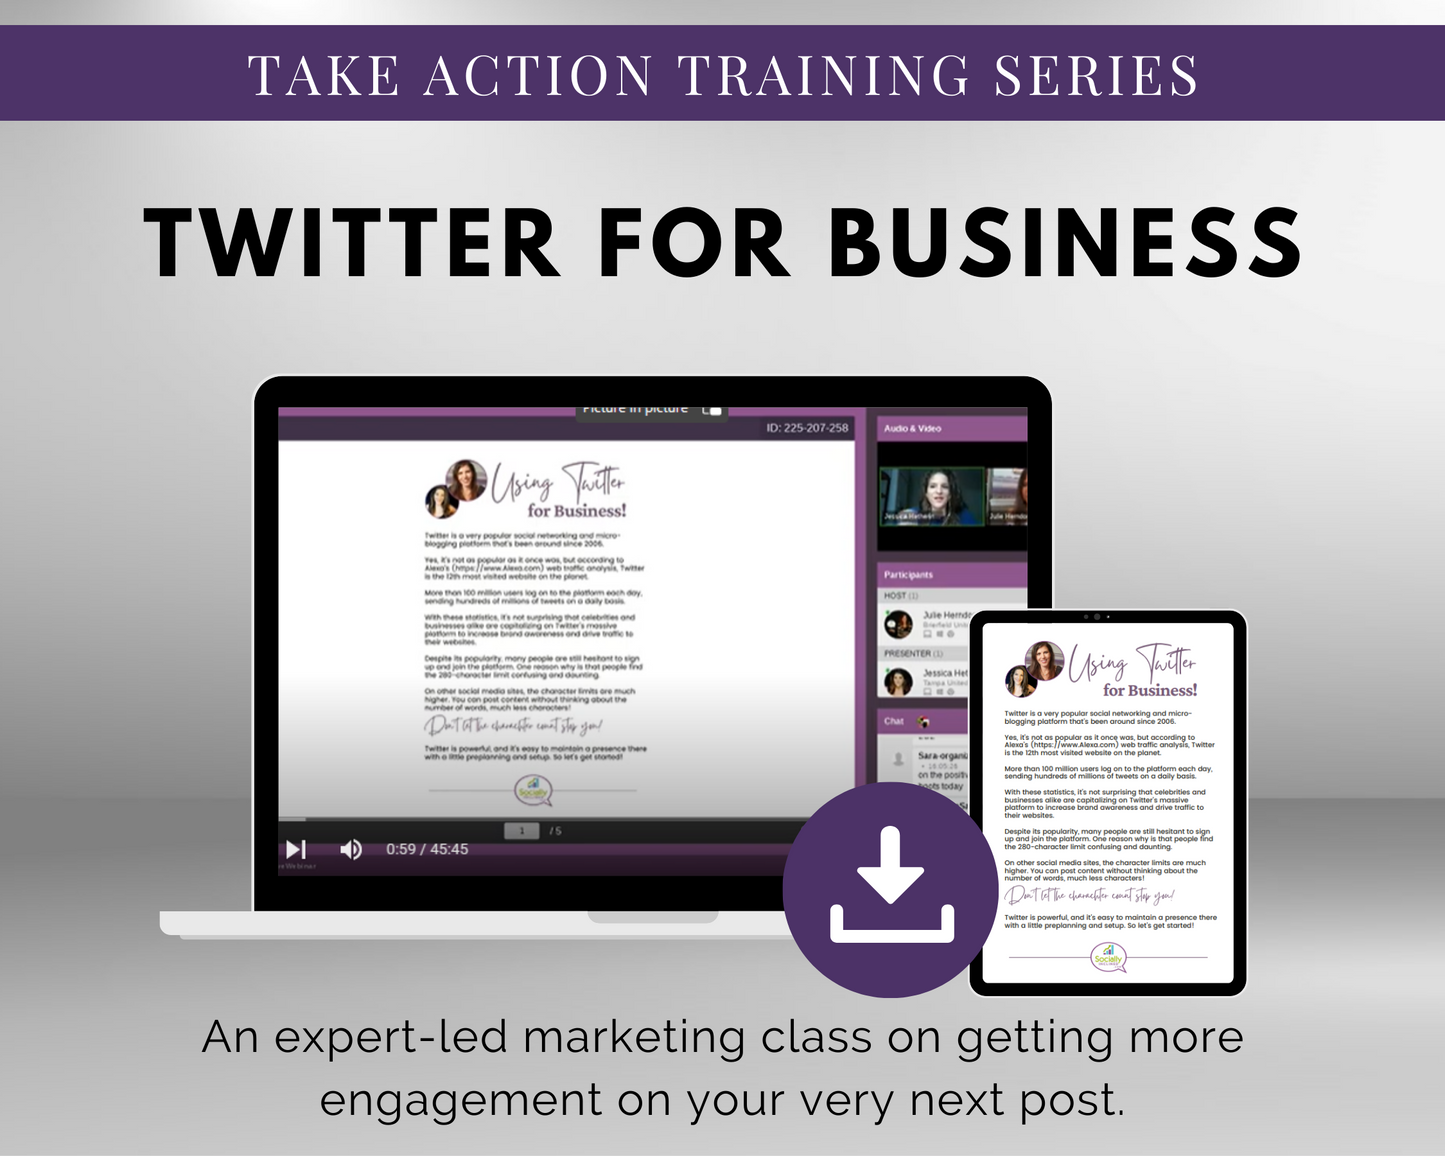 Enhance your business's online presence with our comprehensive TAT - Twitter X for Business Masterclass training series. Gain the knowledge and skills necessary to effectively leverage Twitter as a marketing tool and take action to grow your Get Socially Inclined brand.